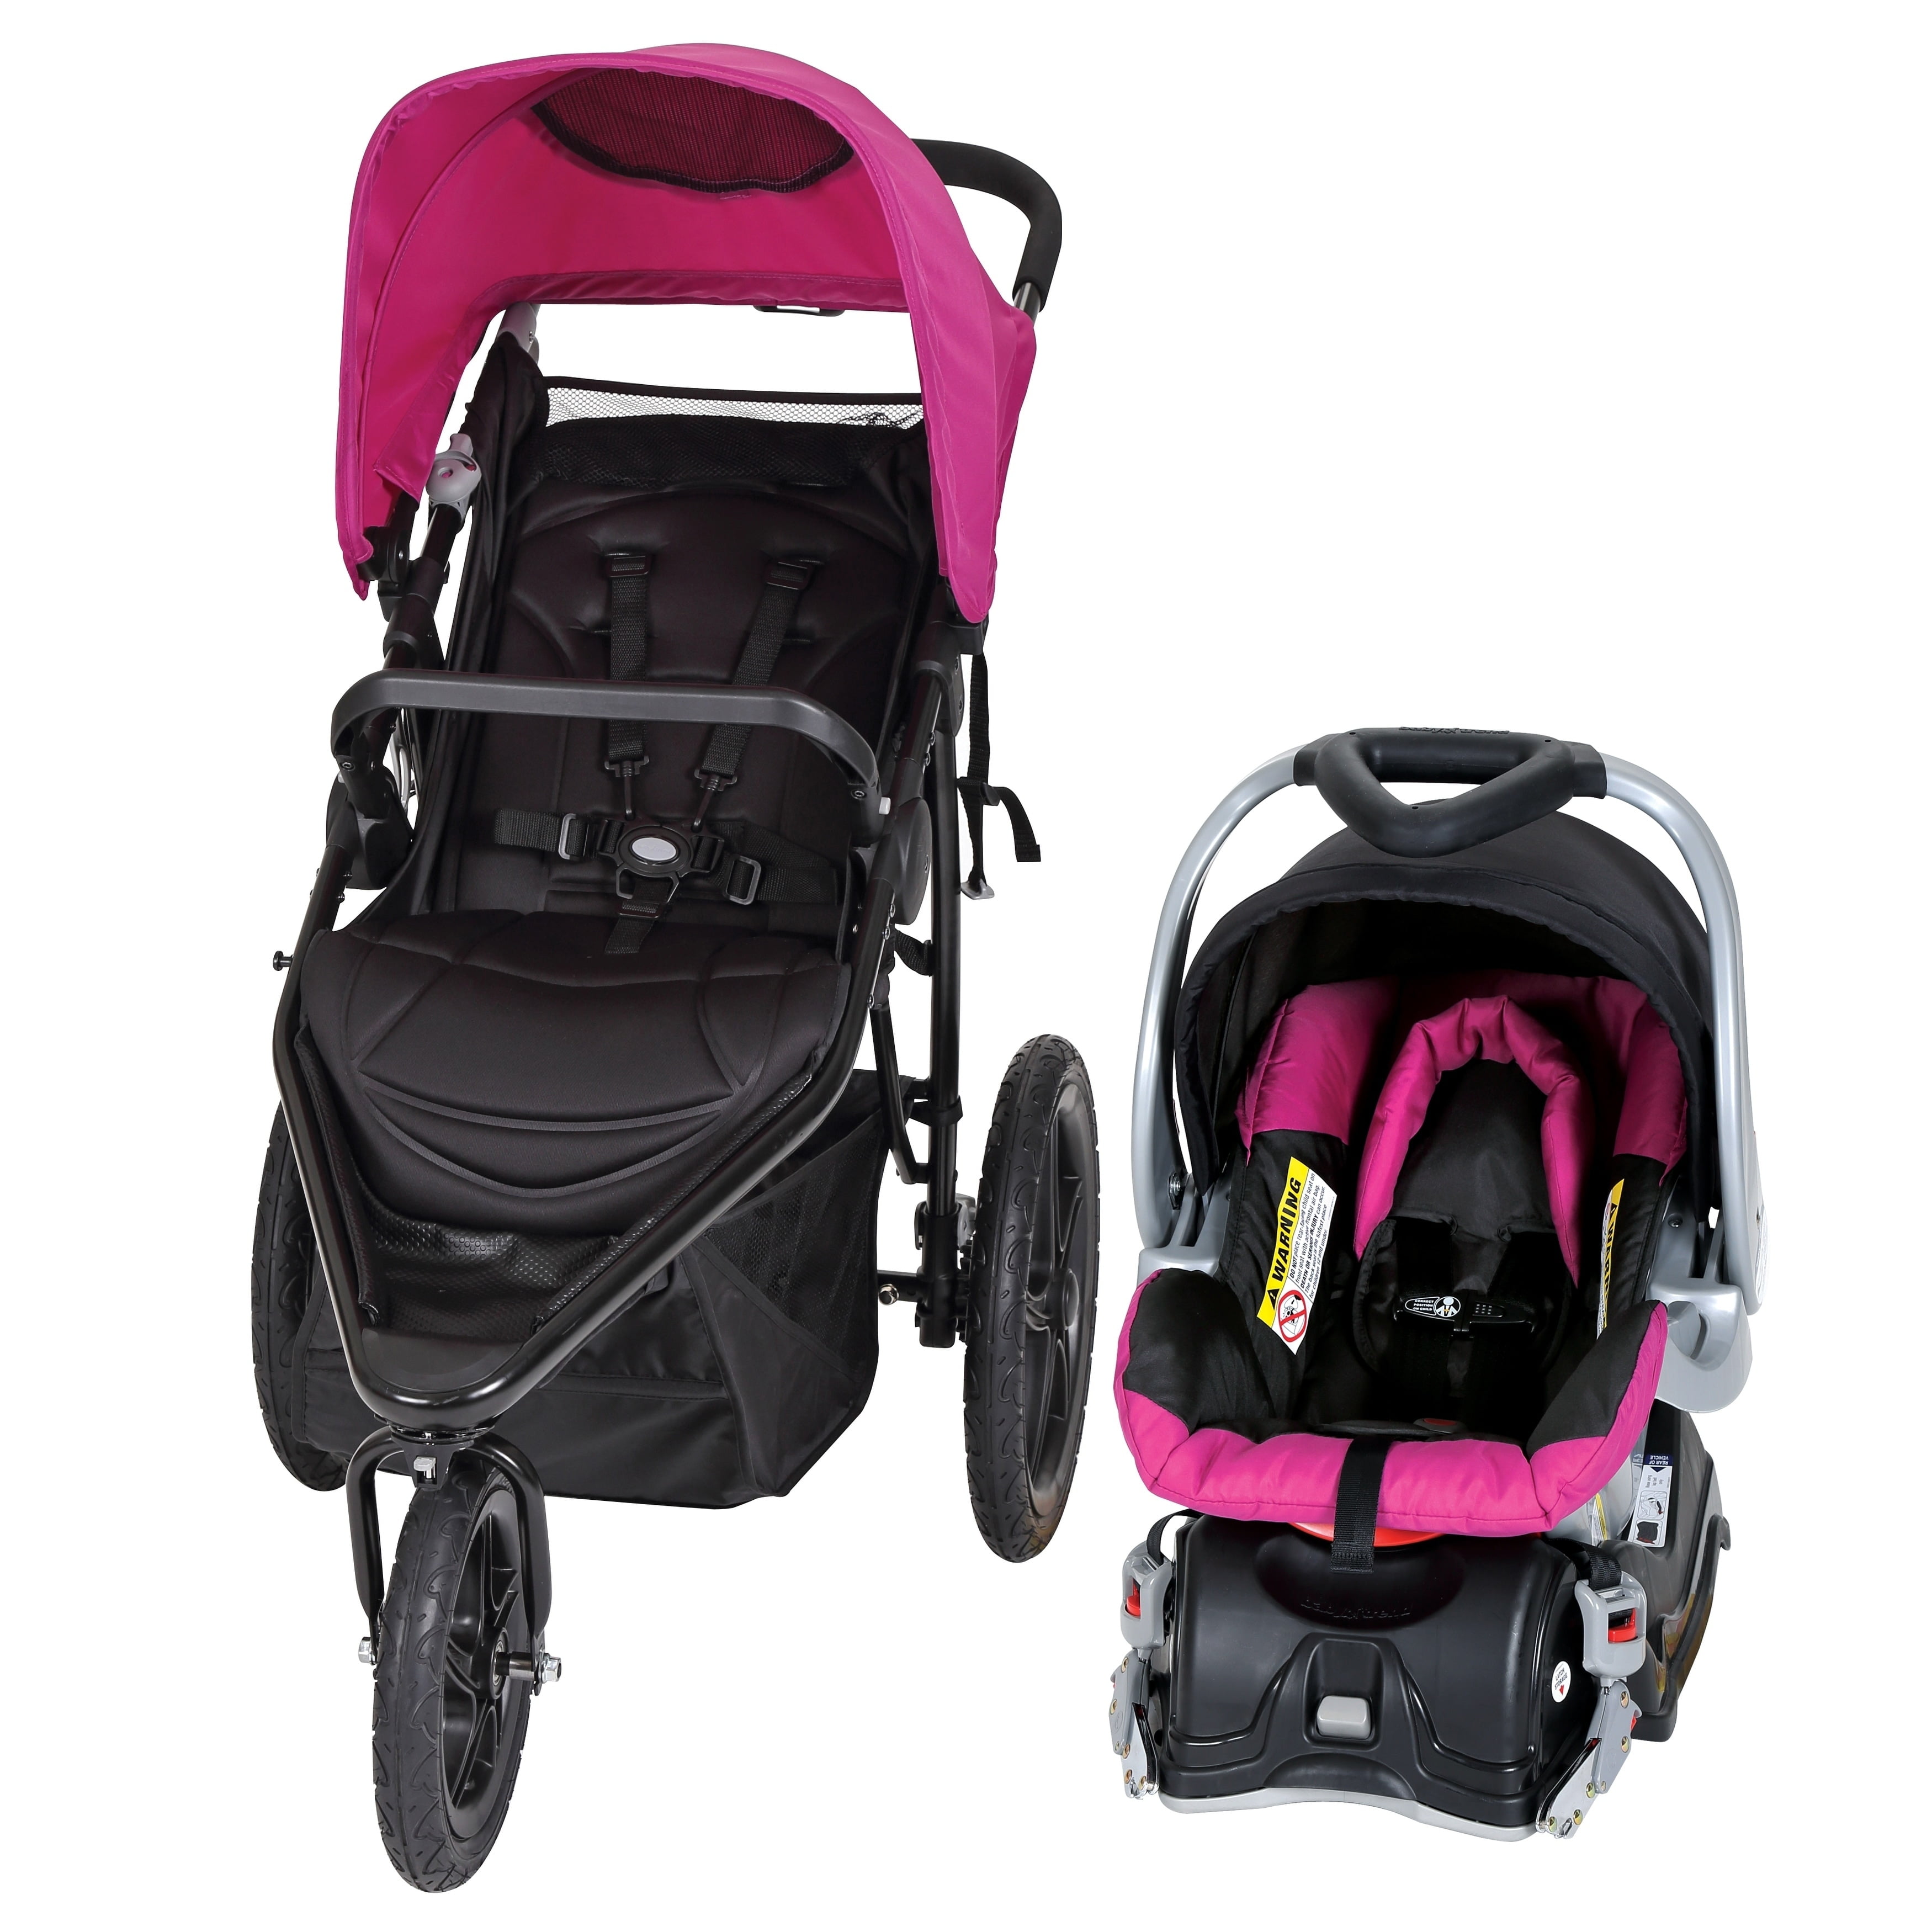 baby trend cityscape jogger travel system base